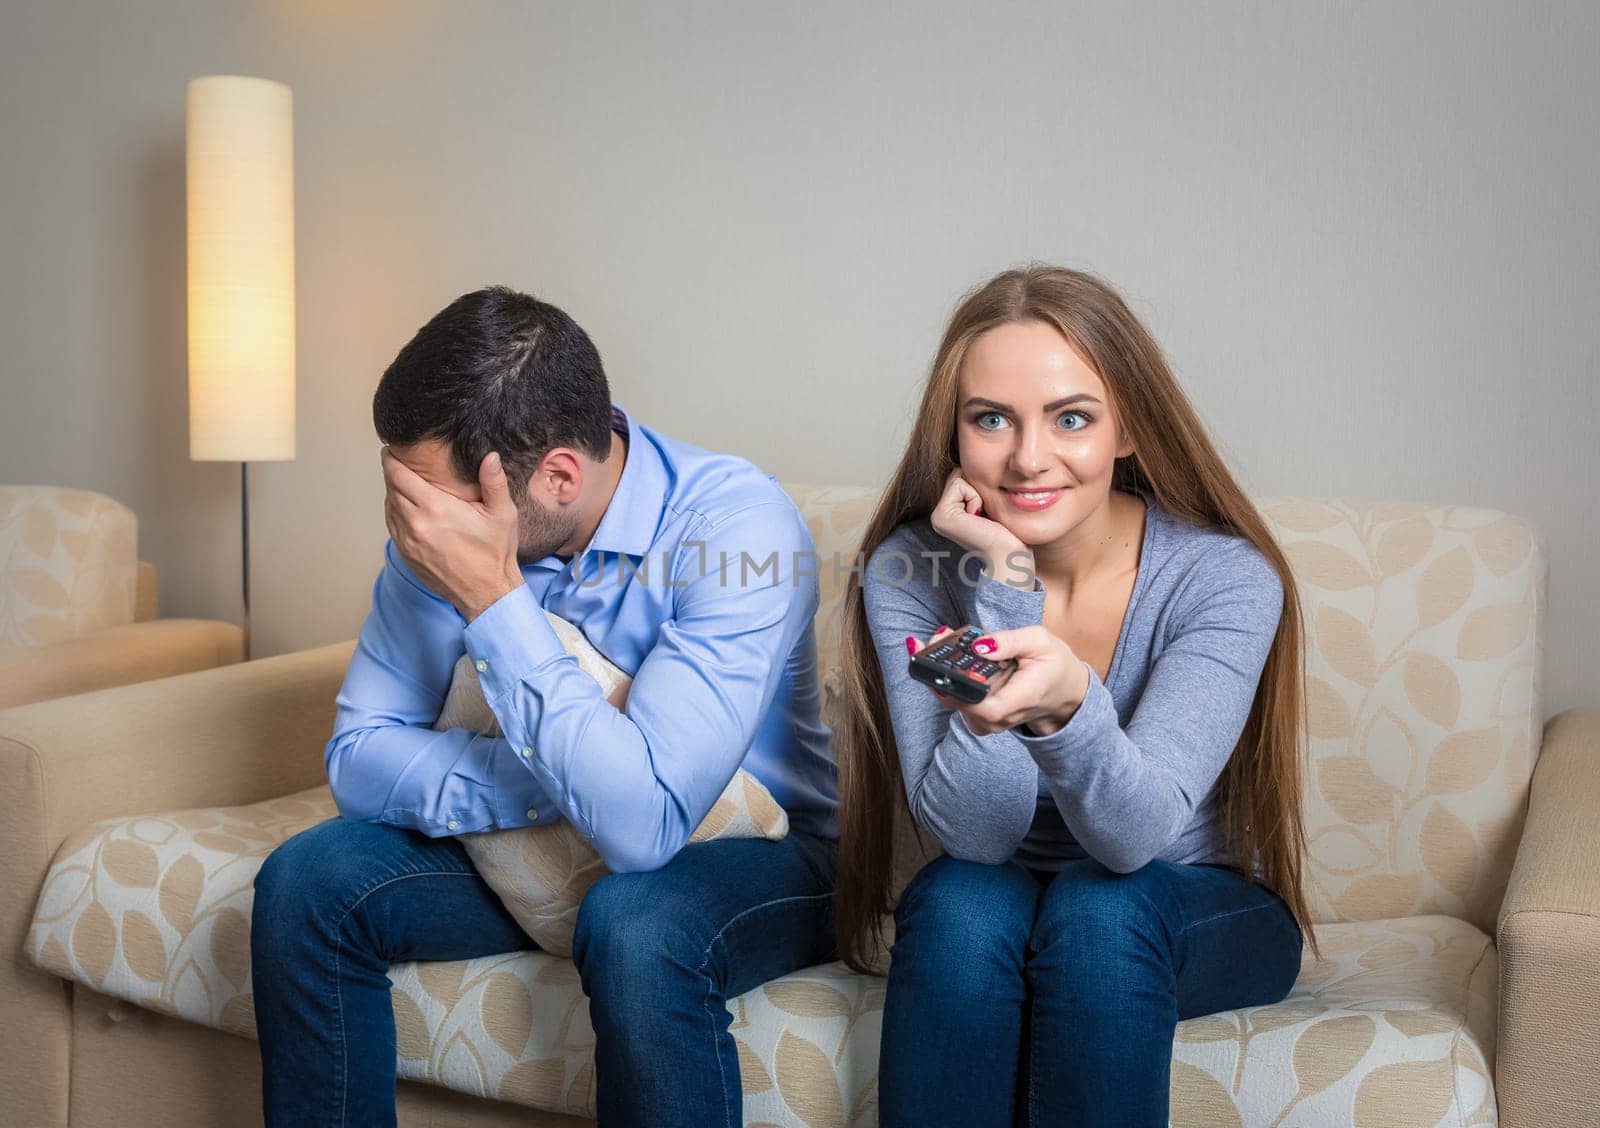 Portrait of couple sitting on sofa watching television. Image of woman with remote control in hands and upset men